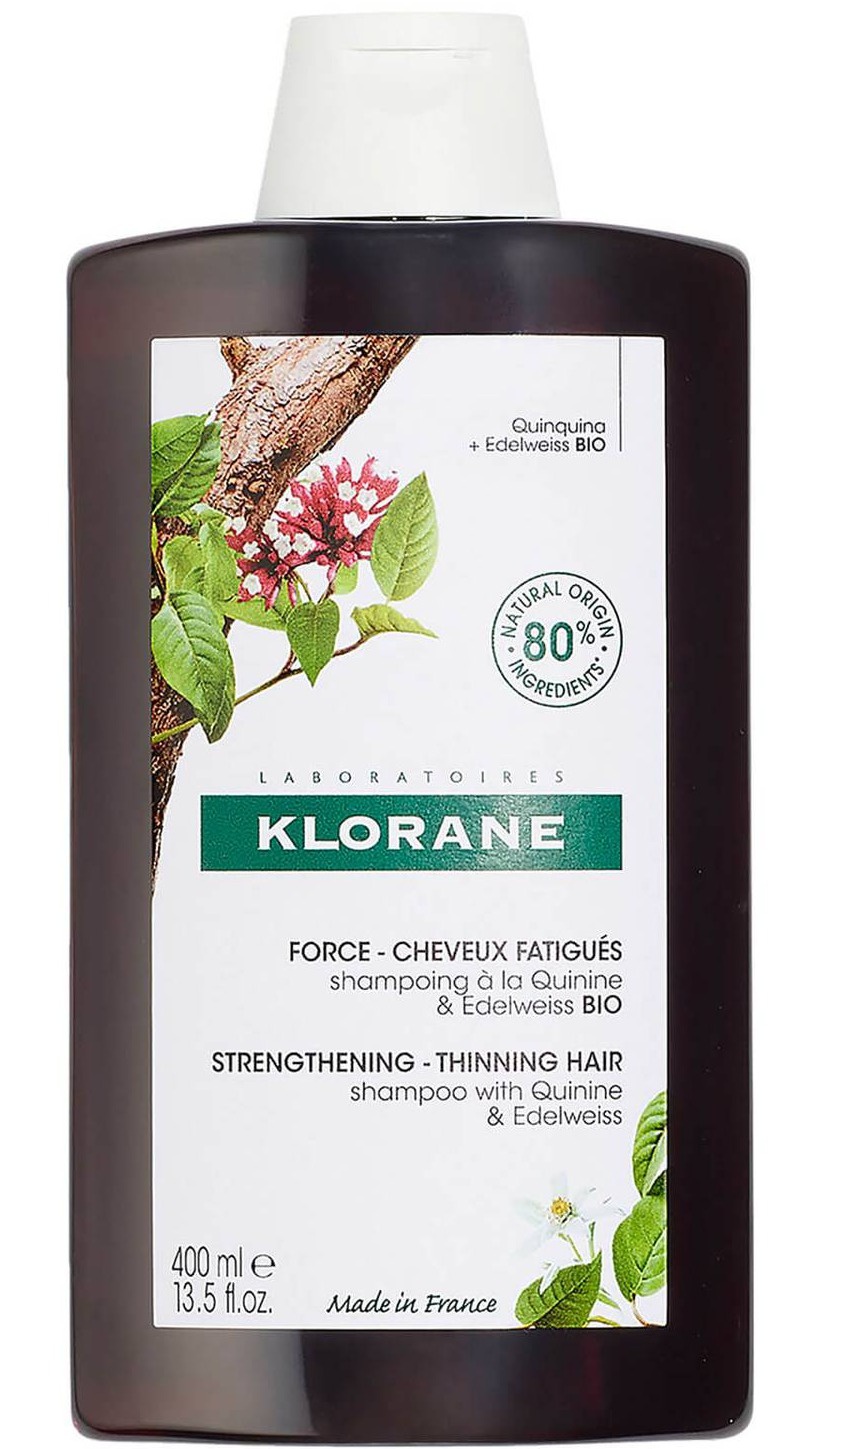 Klorane Shampoo With Quinine & Edelweiss